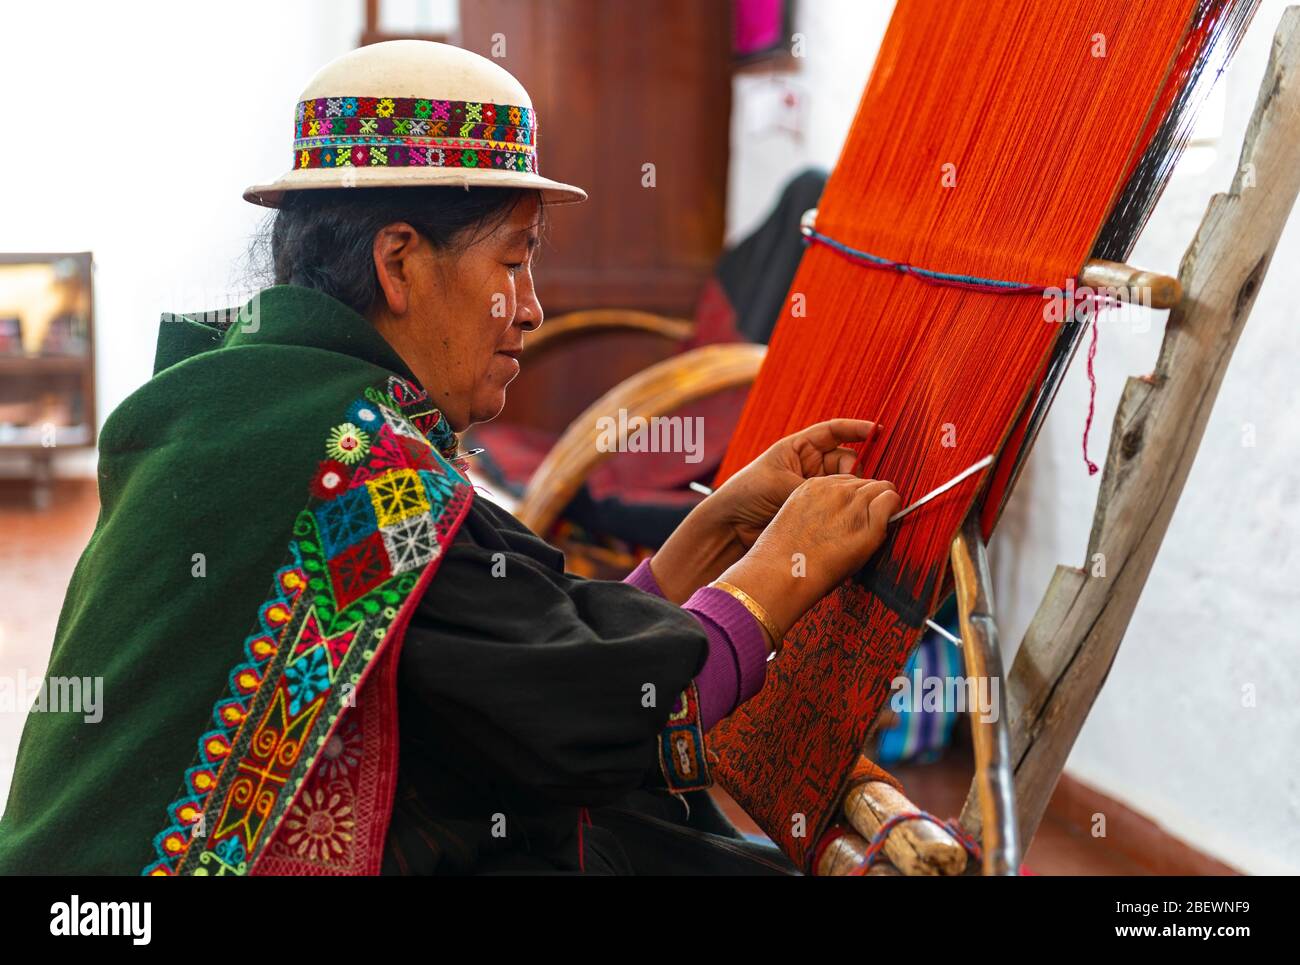 Indigenous senior woman in traditional clothing weaving a Jalq'a textile or fabric with ancient techniques, Sucre, Bolivia. Stock Photo